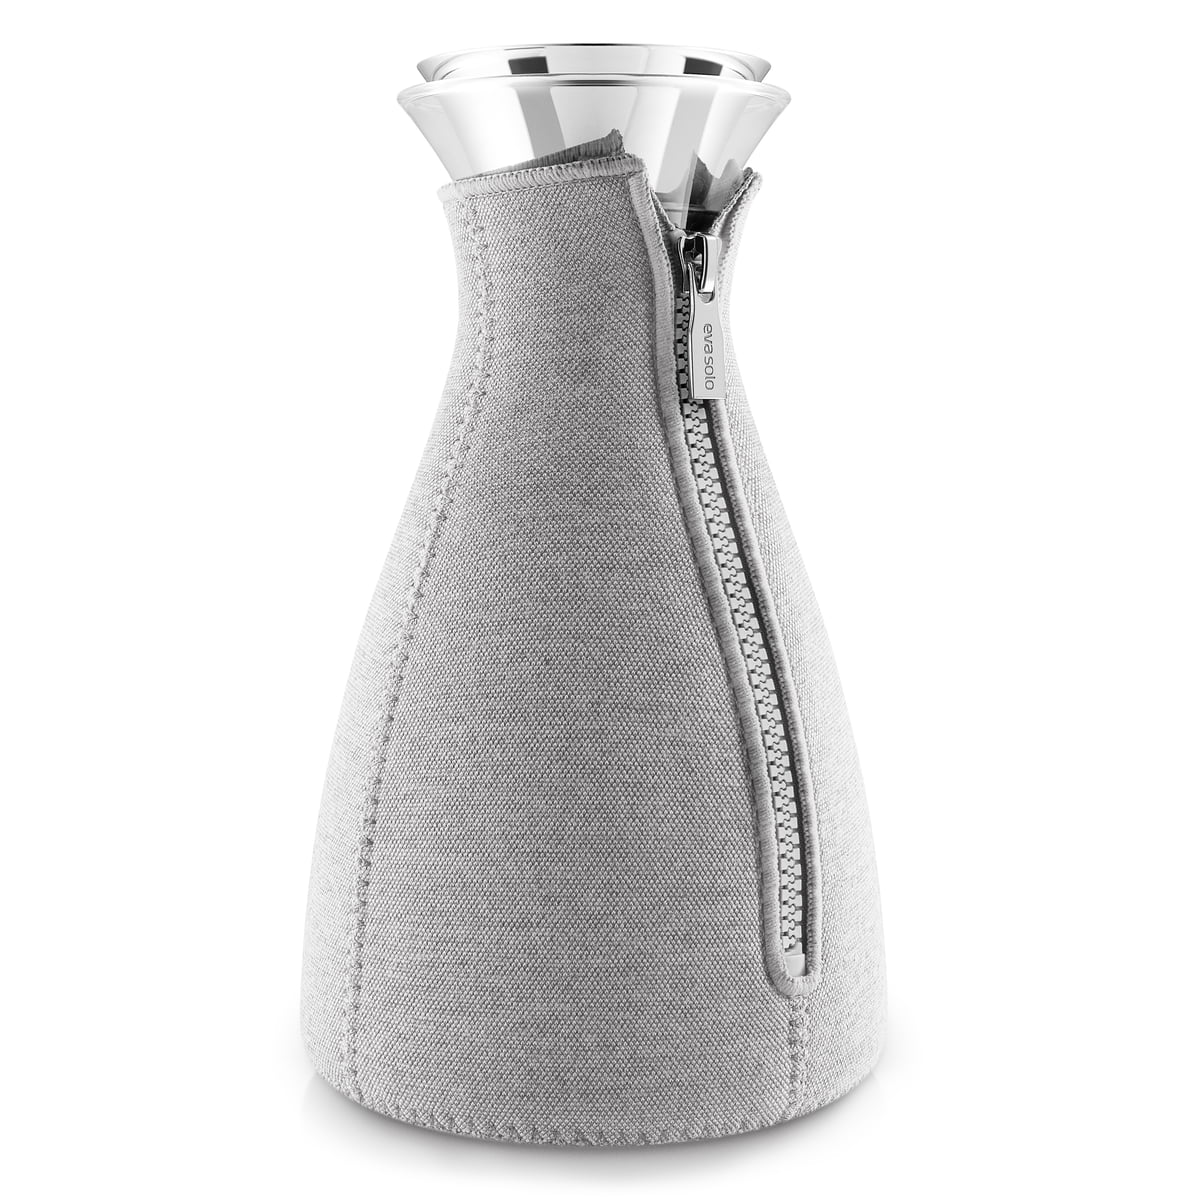 Eva Solo - Cafe Solo Coffee Maker with Woven Cover, 1.0L Light Grey